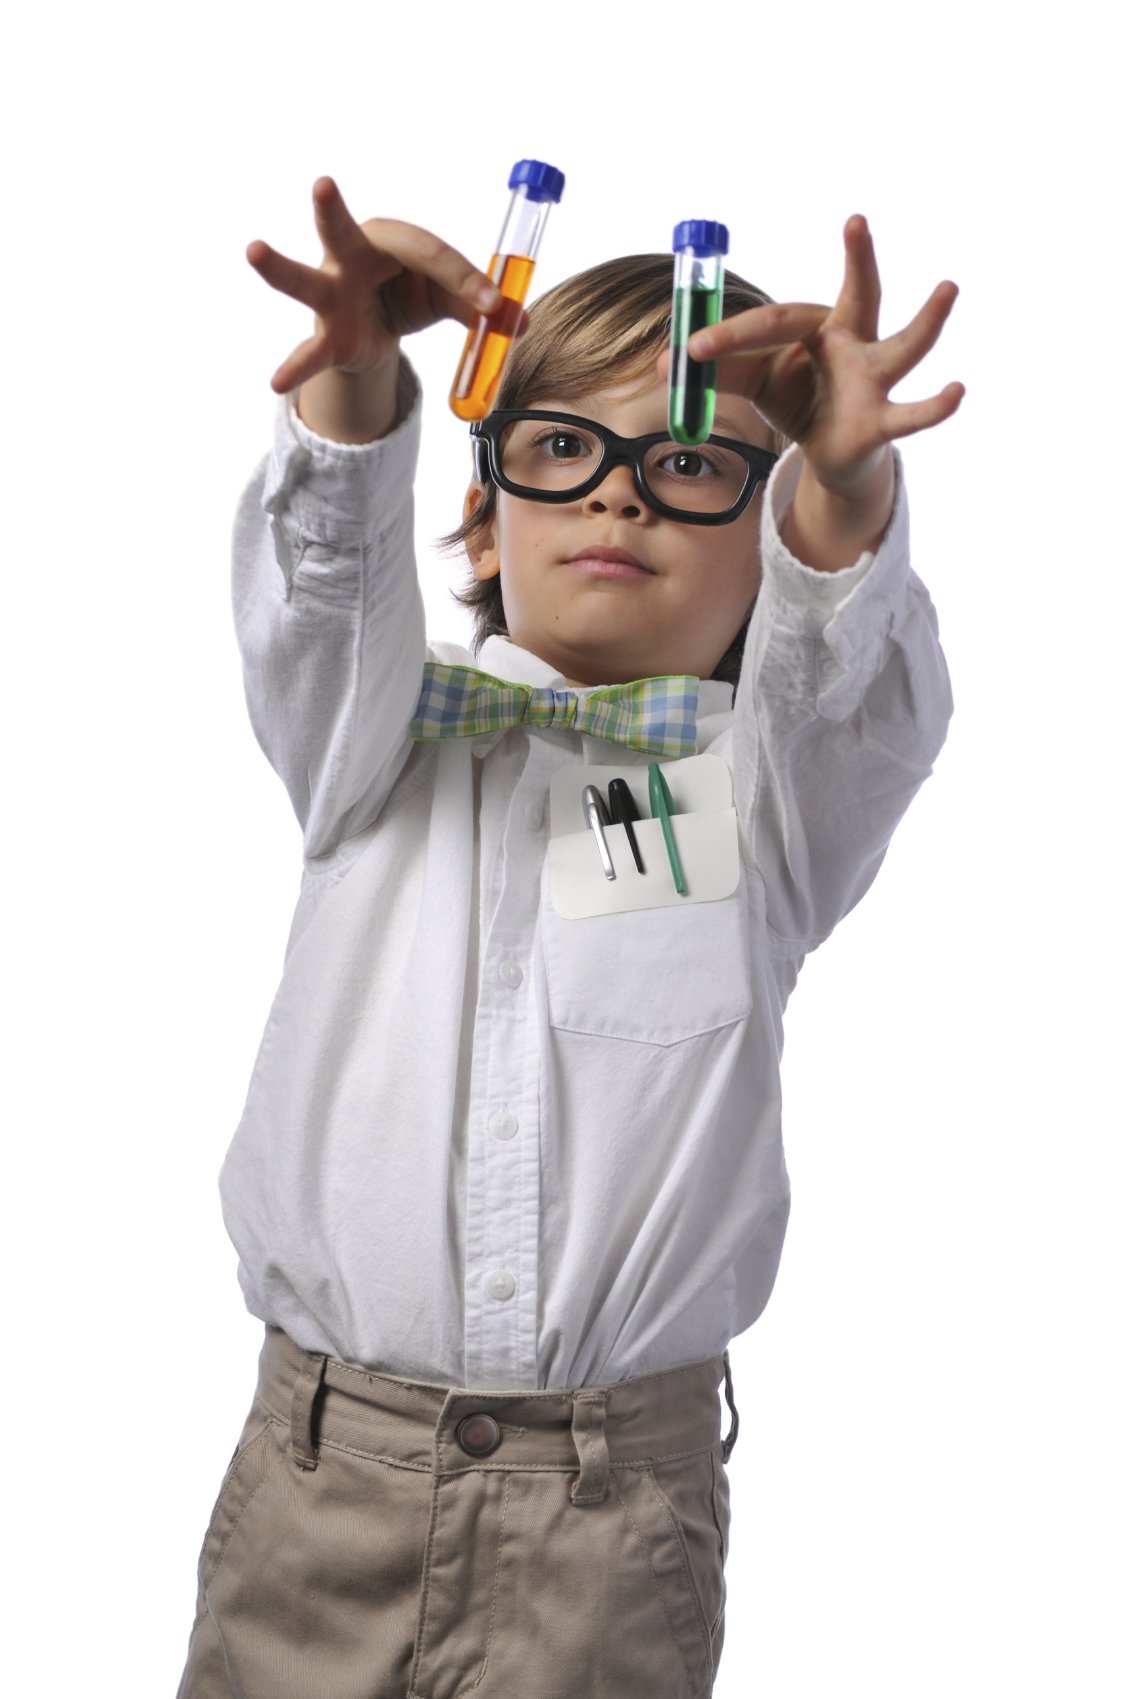 7 Tips for Supplementing Your Child’s Science Education (Ages 3-6)